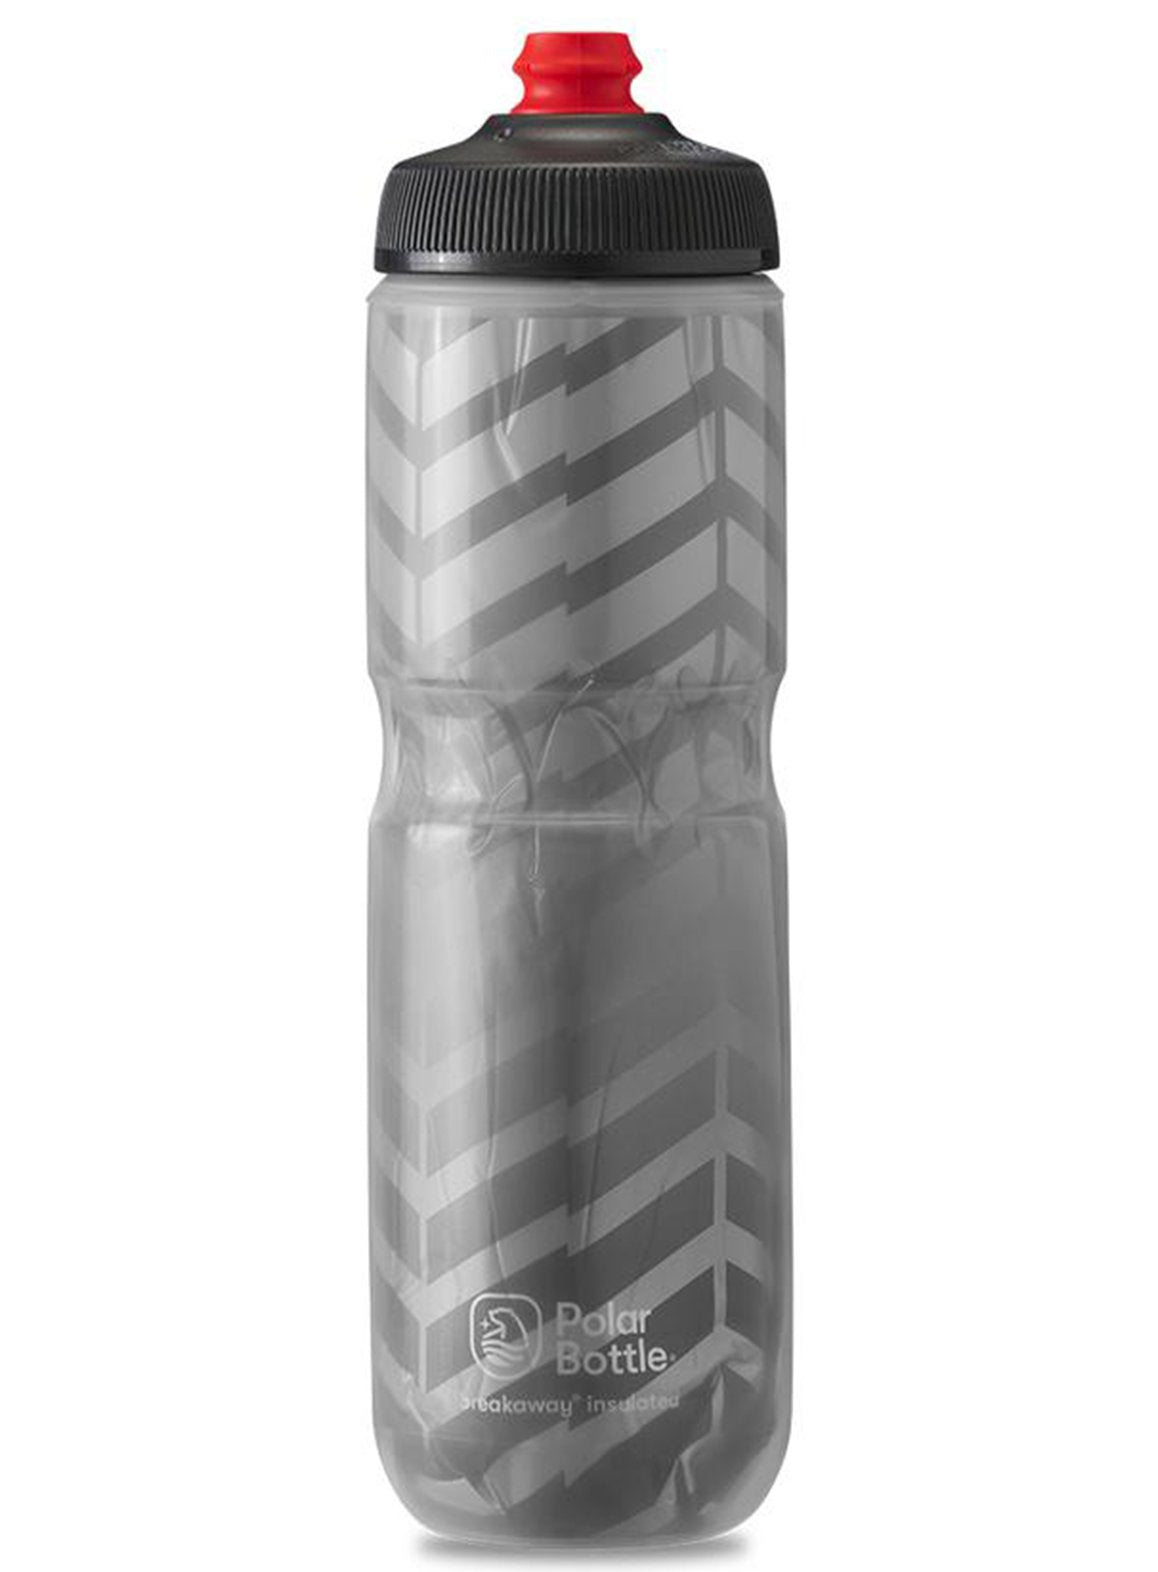 https://cdn.shopify.com/s/files/1/0032/9023/4992/products/PolarBottleBreakawayInsulatedBolt24ozWaterBottle_Charcoal-Silver_313b51d4-33a8-4a27-bbb0-ad55fdeaee85.jpg?v=1620900690